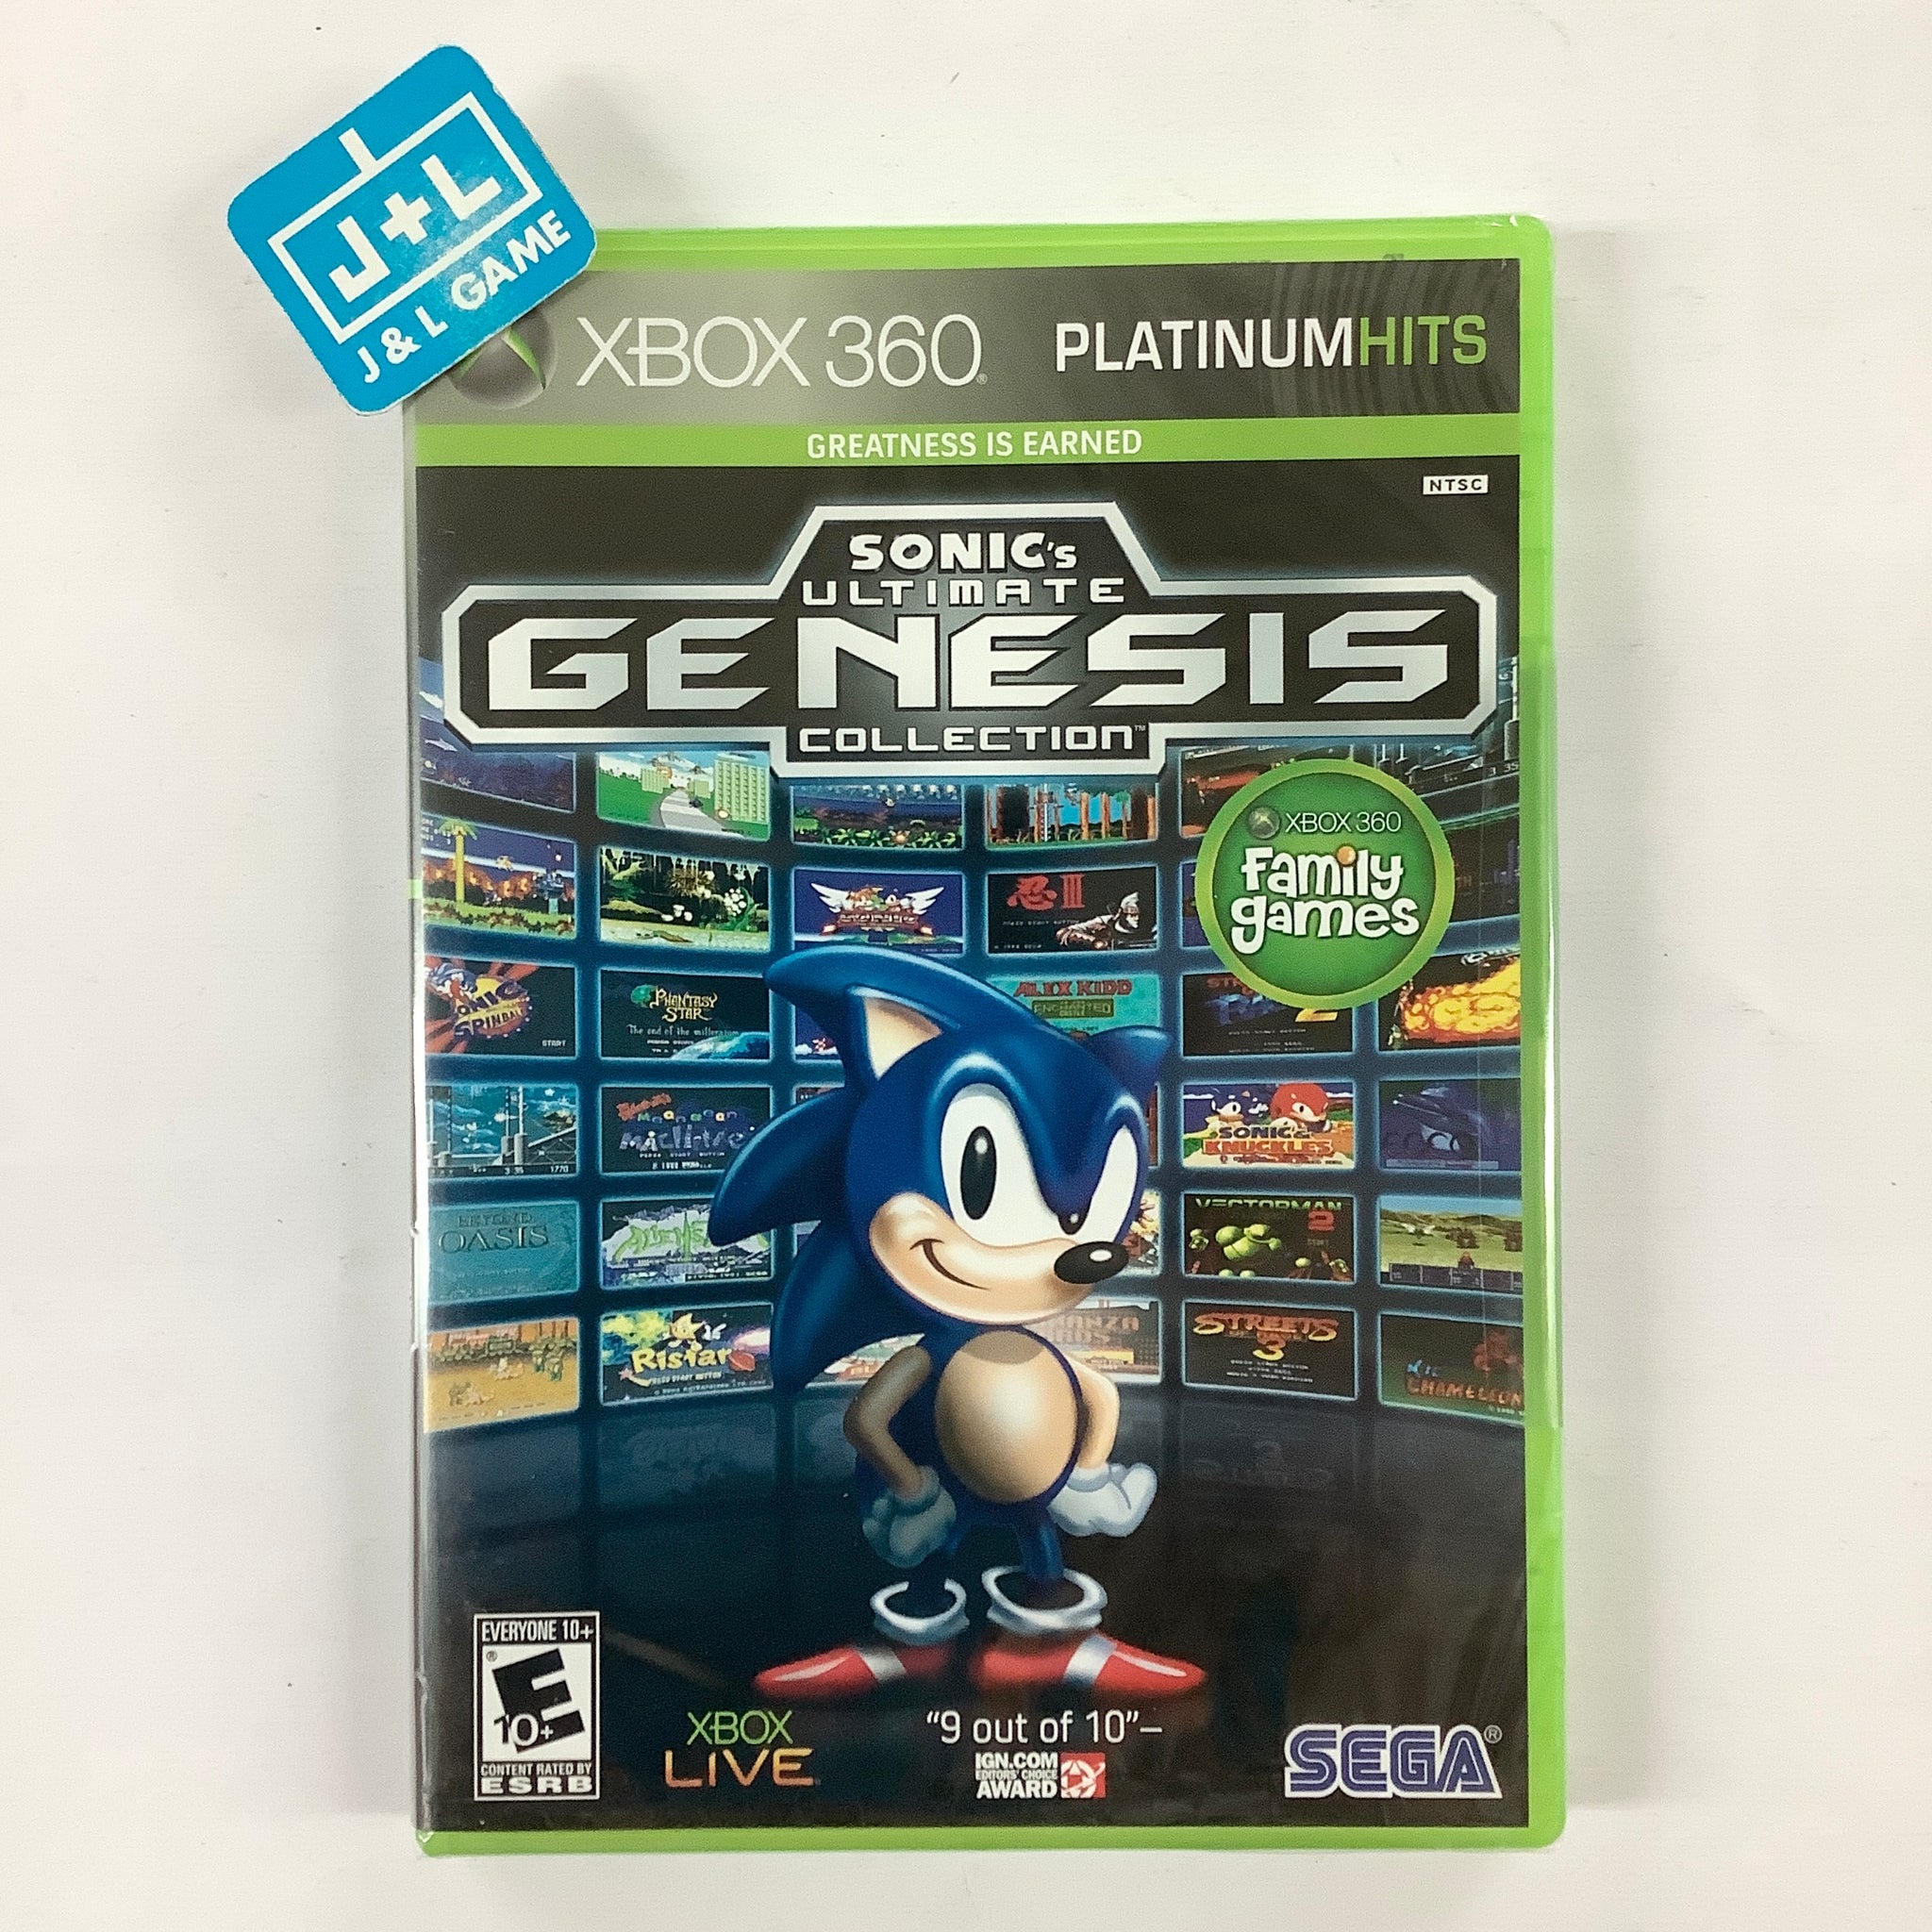 Sonic's Ultimate Genesis Collection - Xbox 360 Video Games Sega   